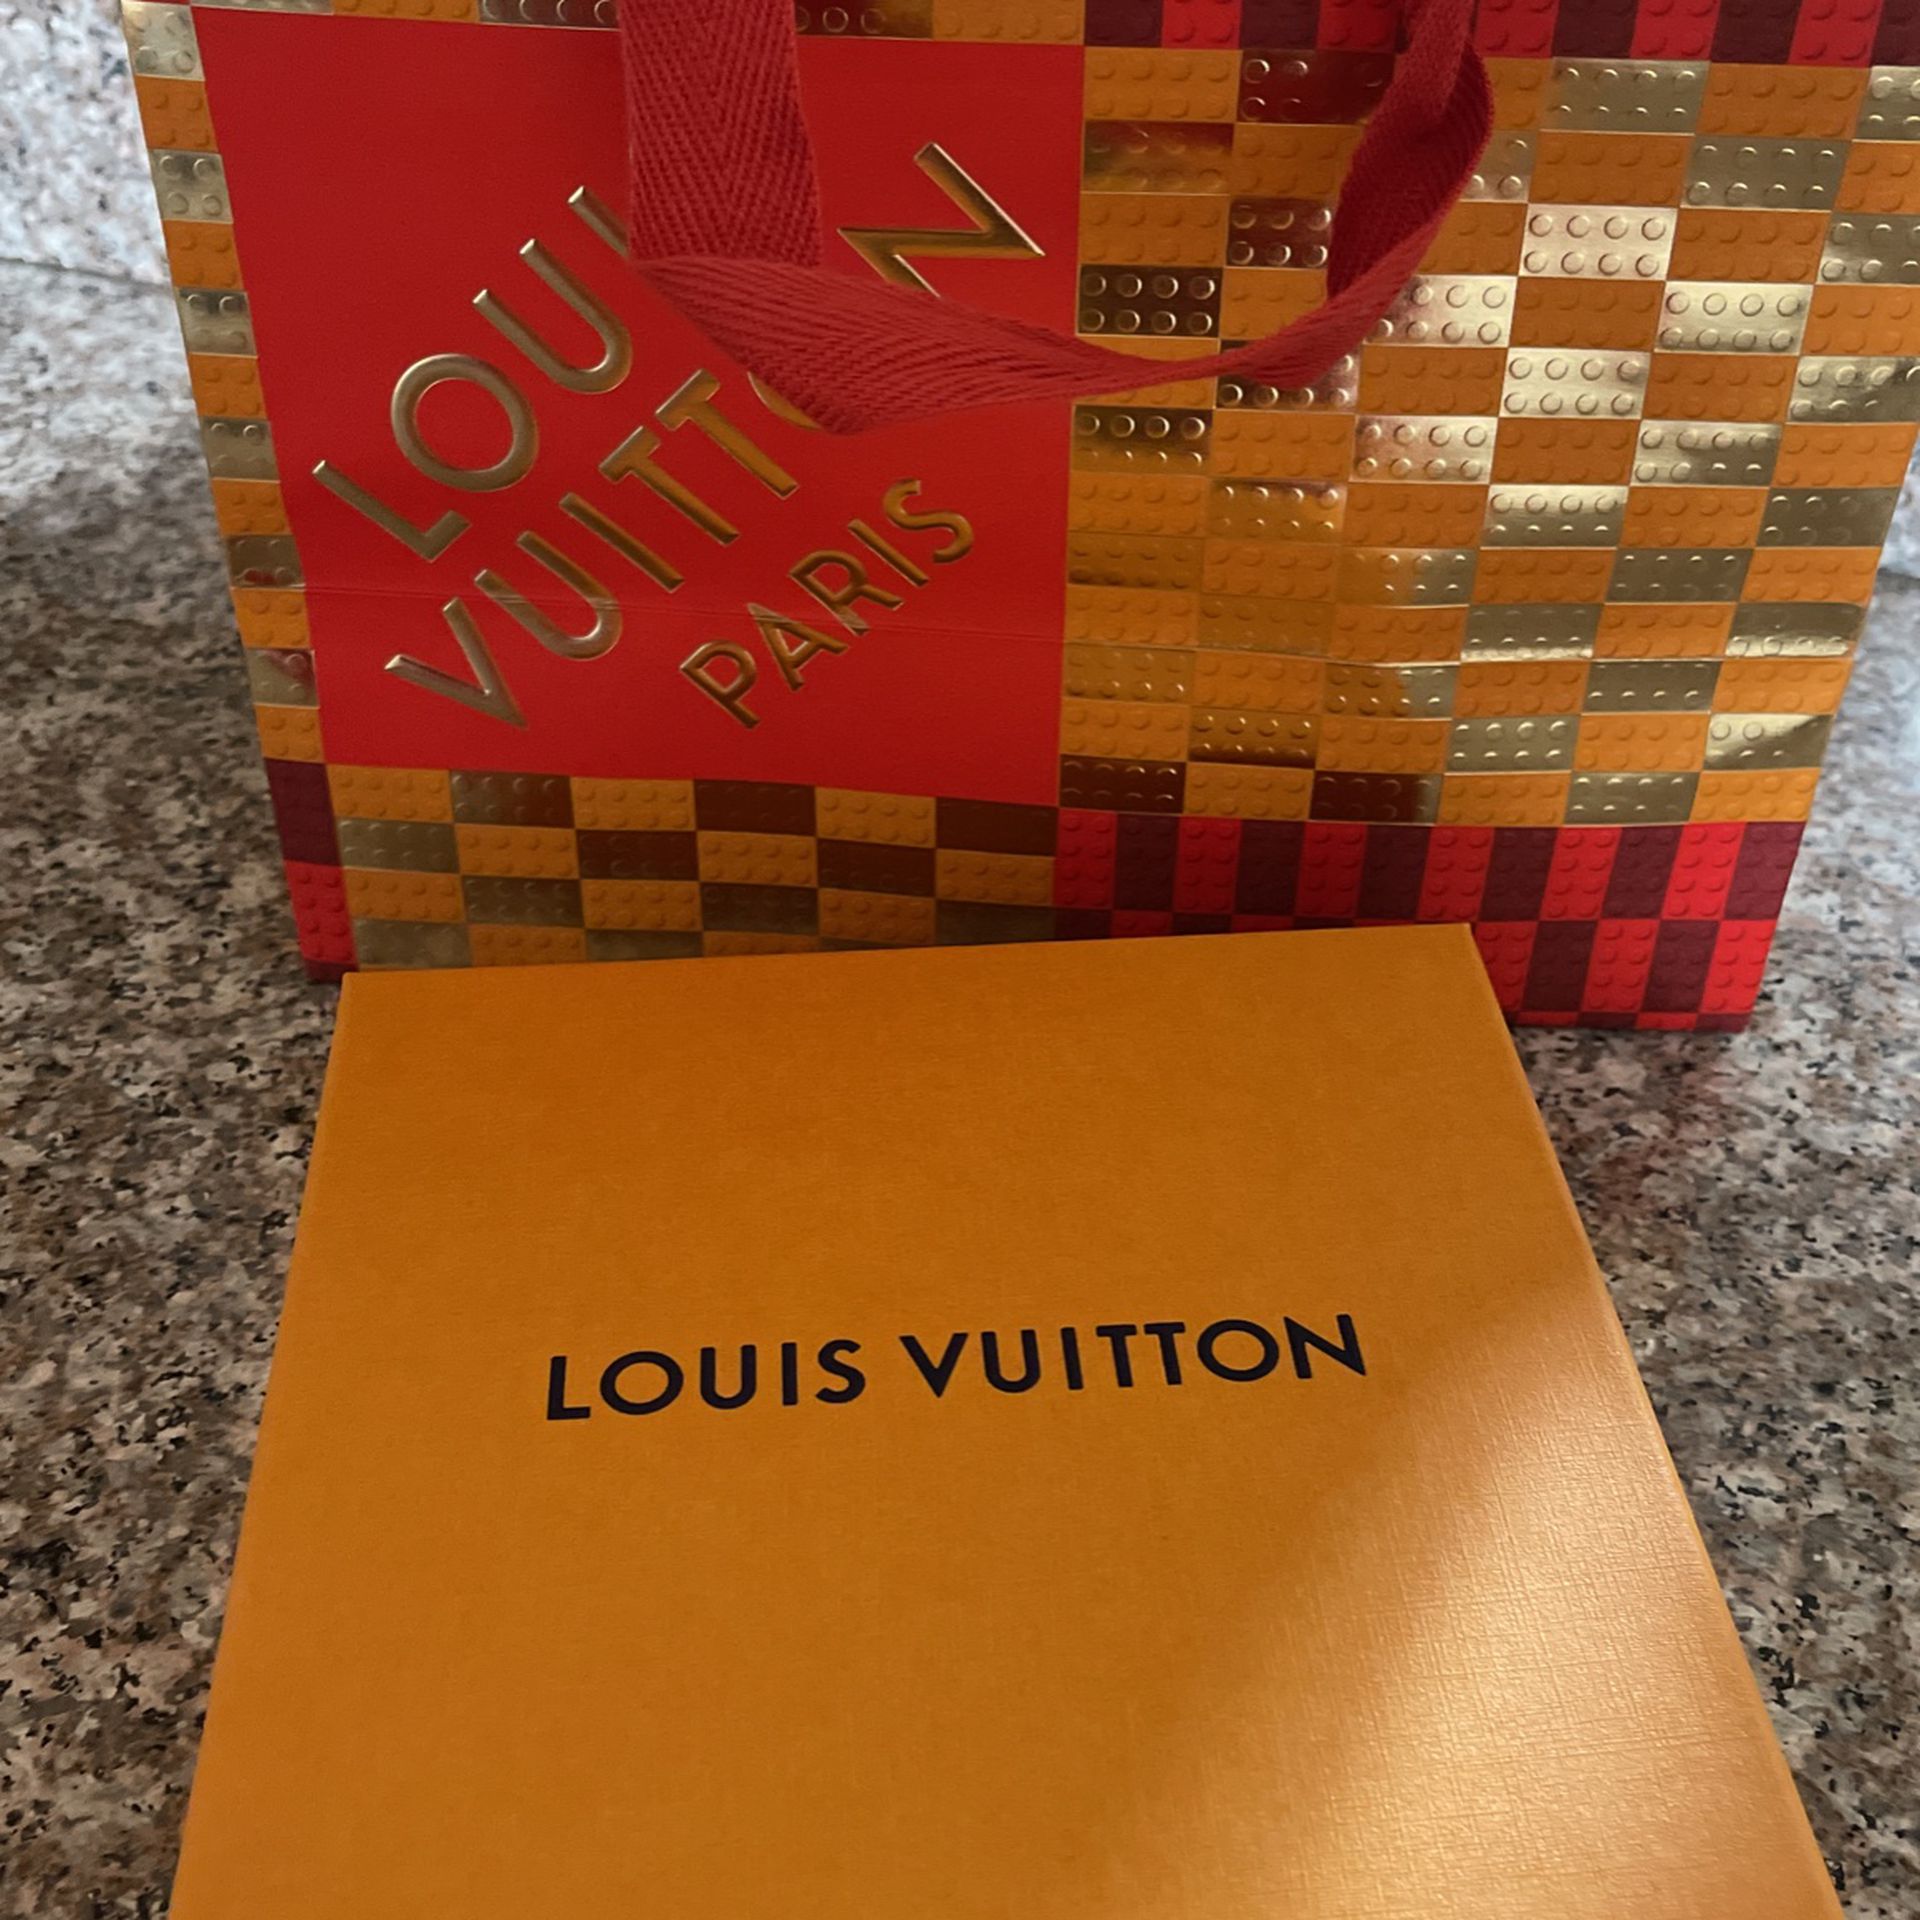 LV SHOPPING BAG GIFT BOX LOUIS VUITTON for Sale in Corona, CA - OfferUp